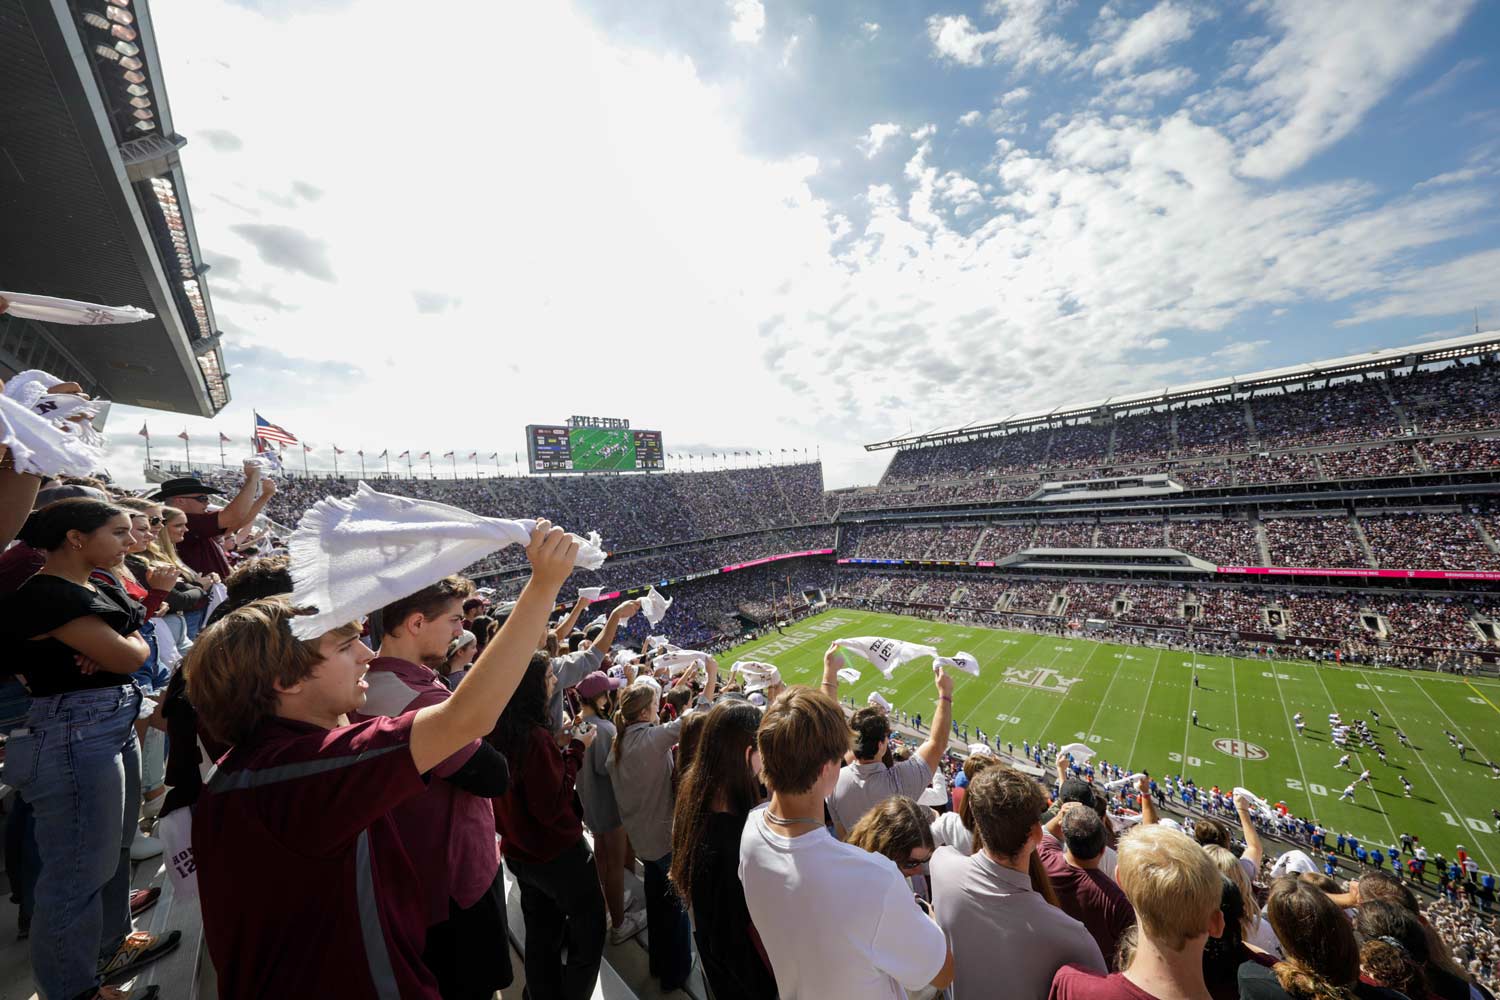 A view of Kyle Field from within the 91Ƶ student section